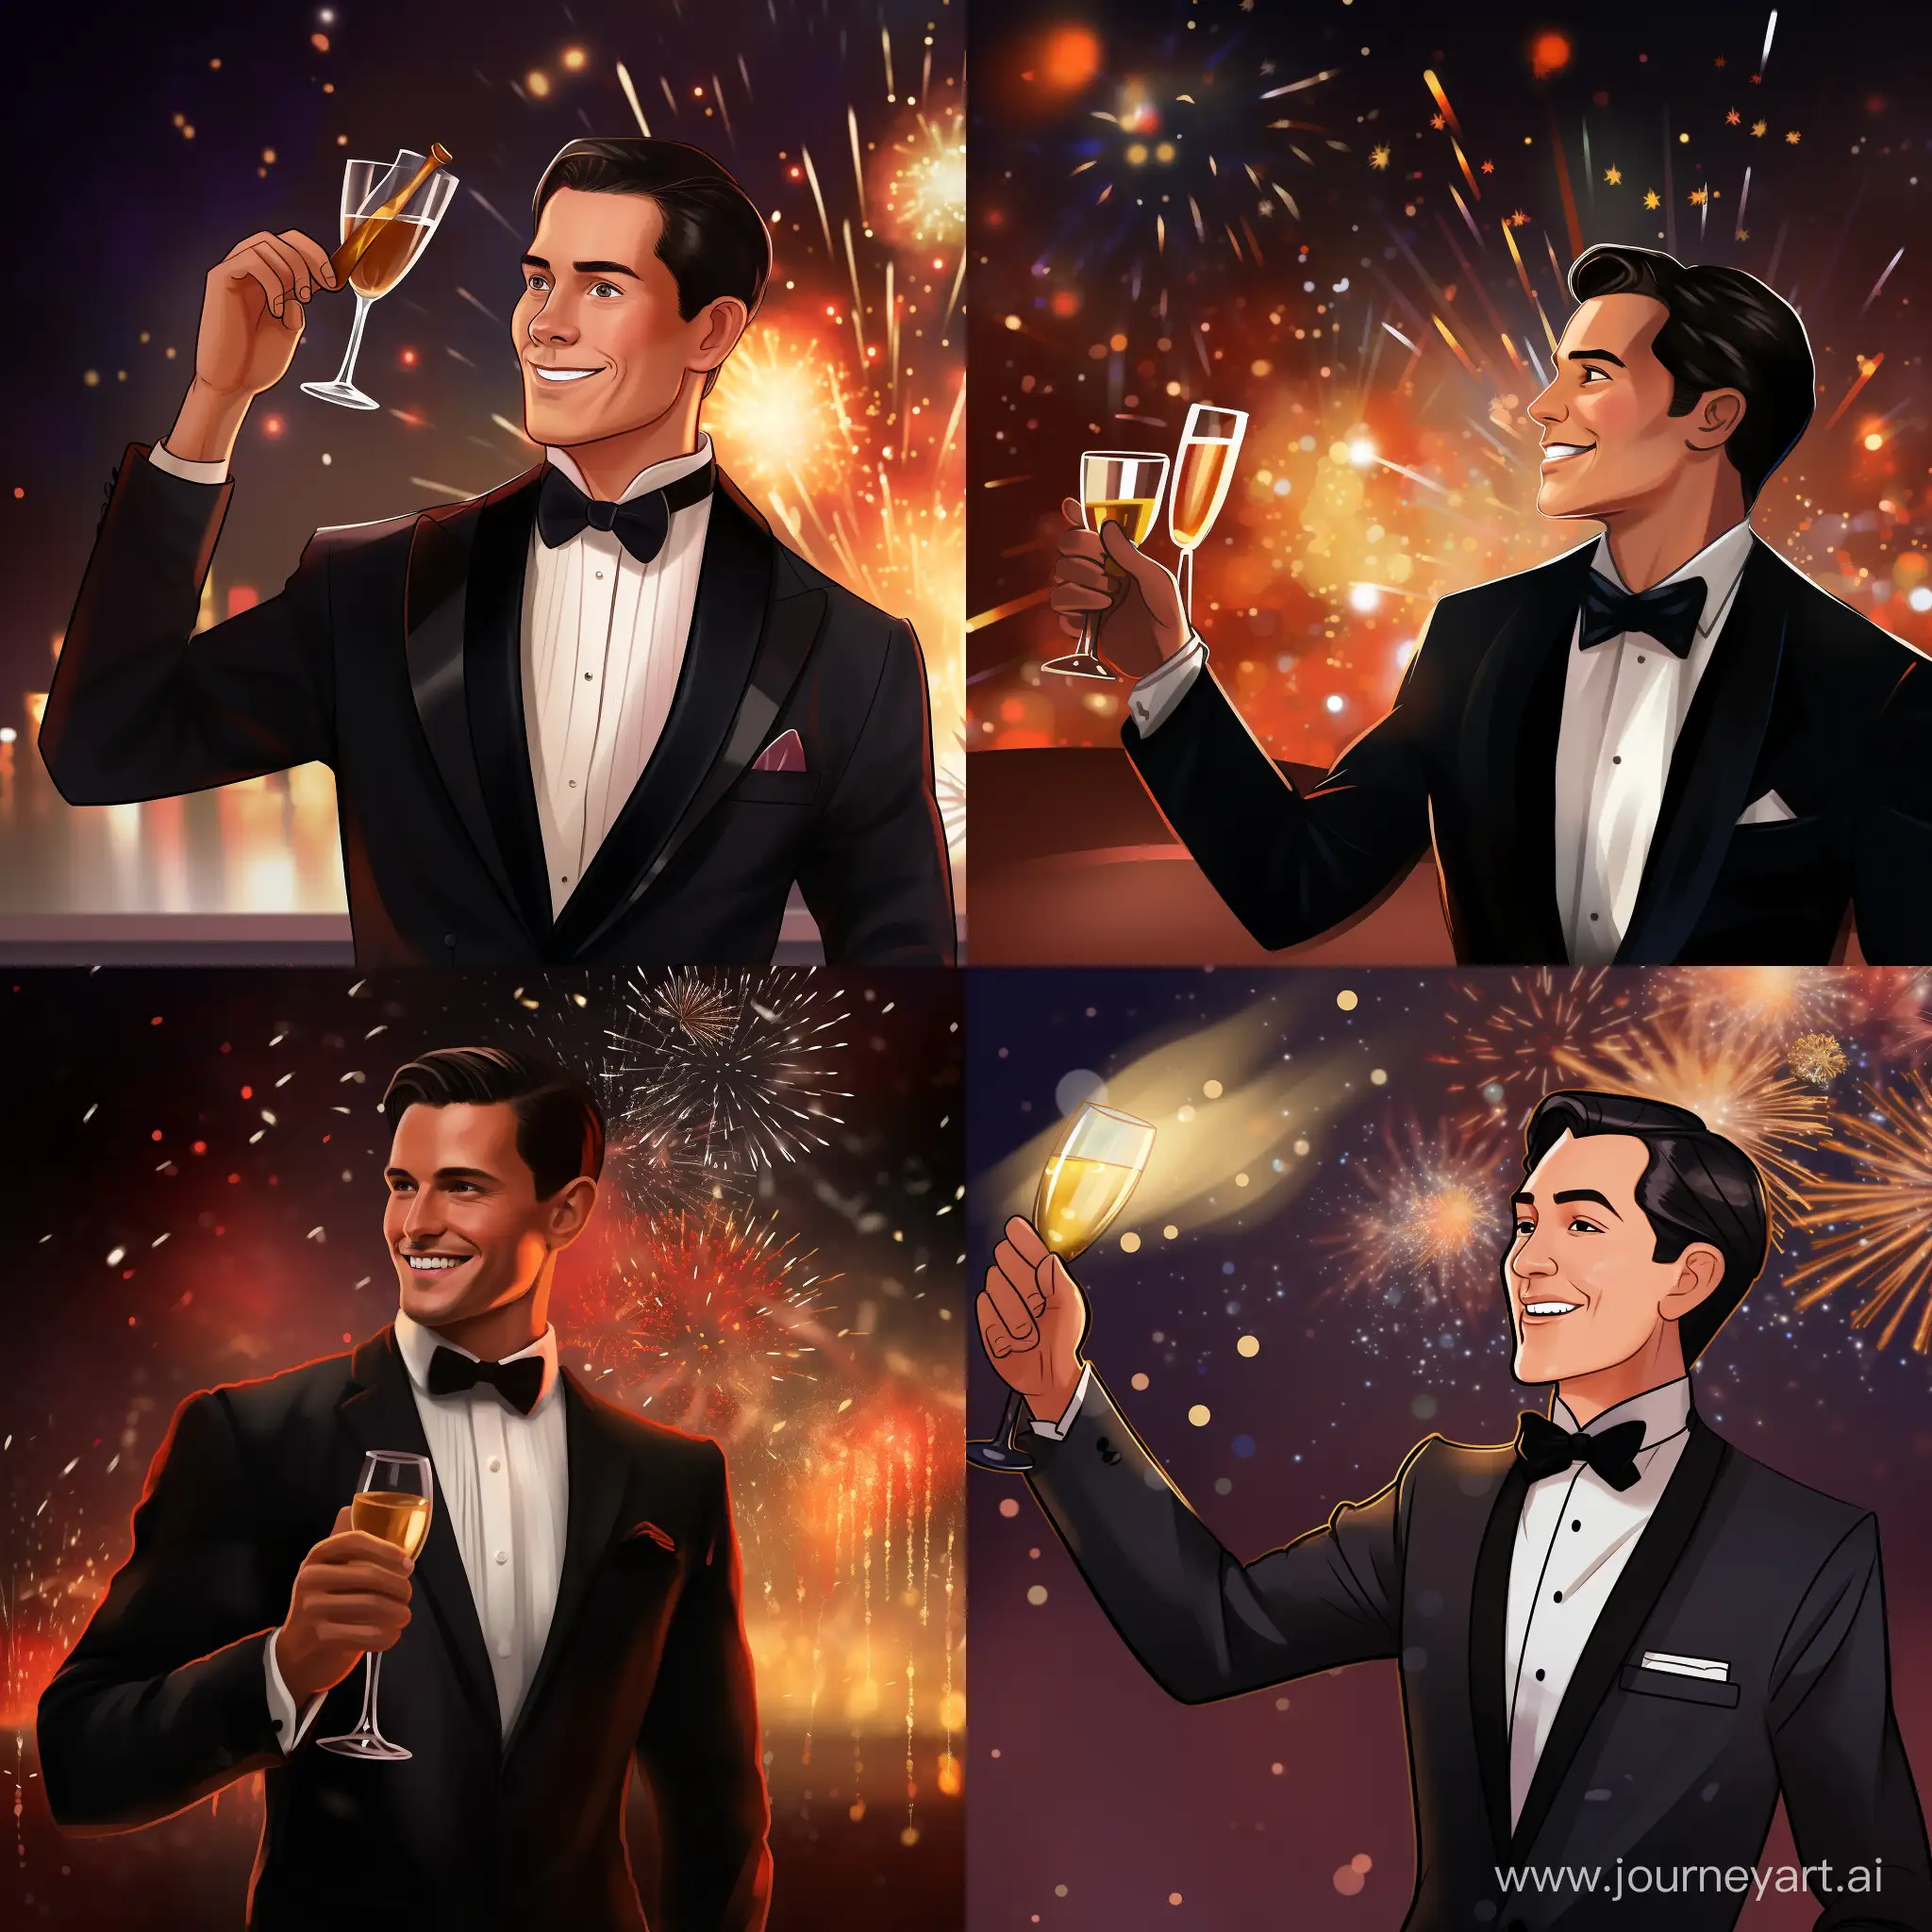 strong built man, dark brown hair slicked back, toasting like The Great Gatsby, wearing a nice suite, fireworks in the background, bokeh background, in cartoon style,